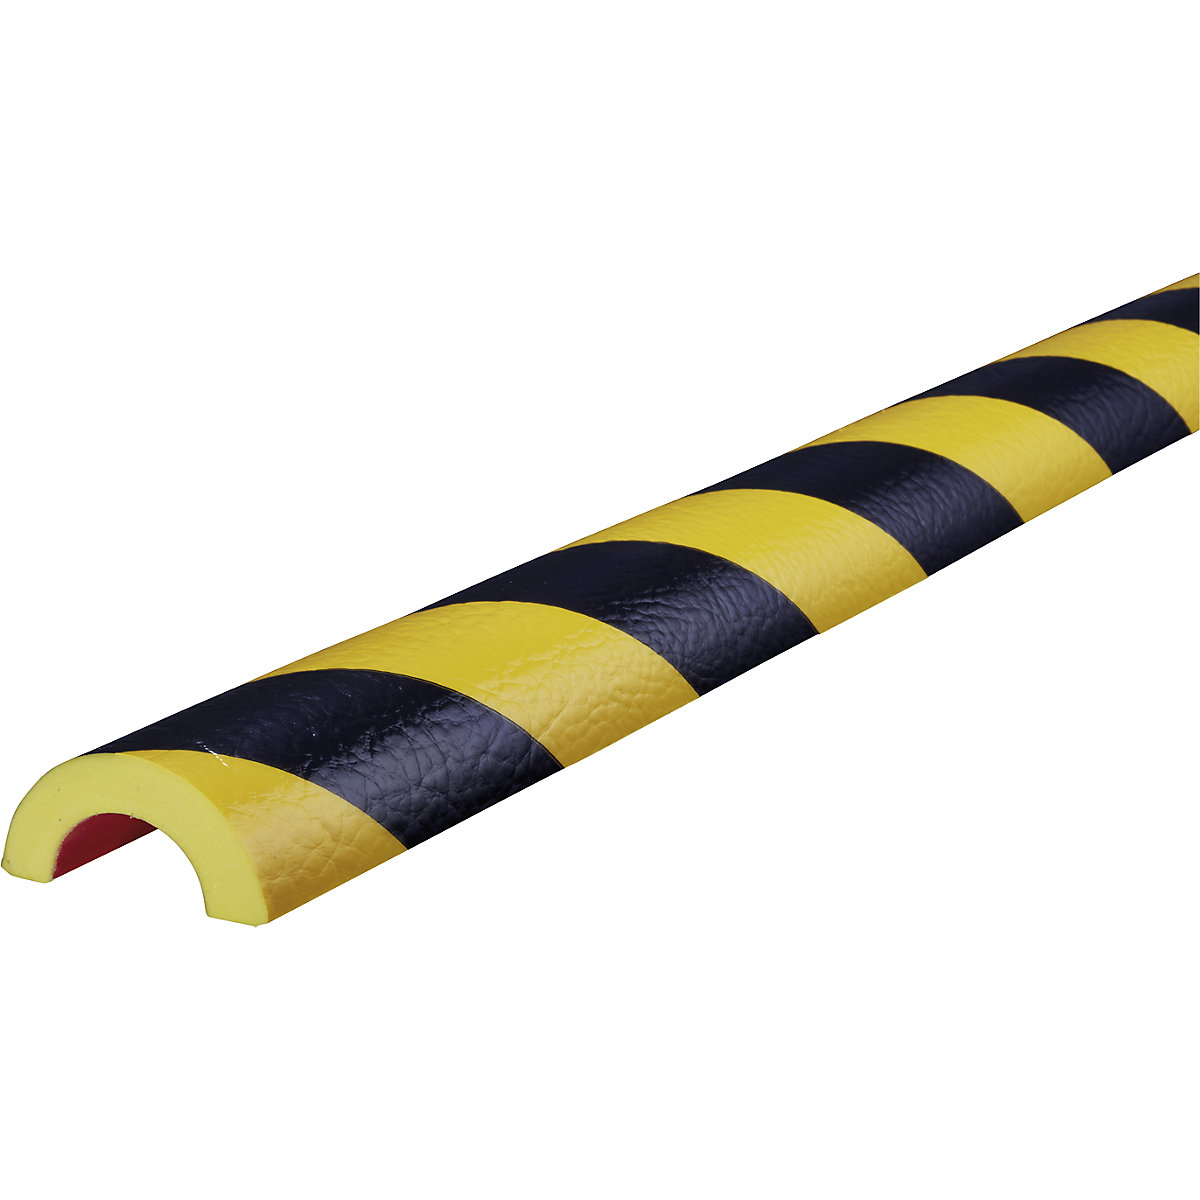 Knuffi® pipe protection – SHG, type R30, cut to size, sold by the metre, black / yellow-11